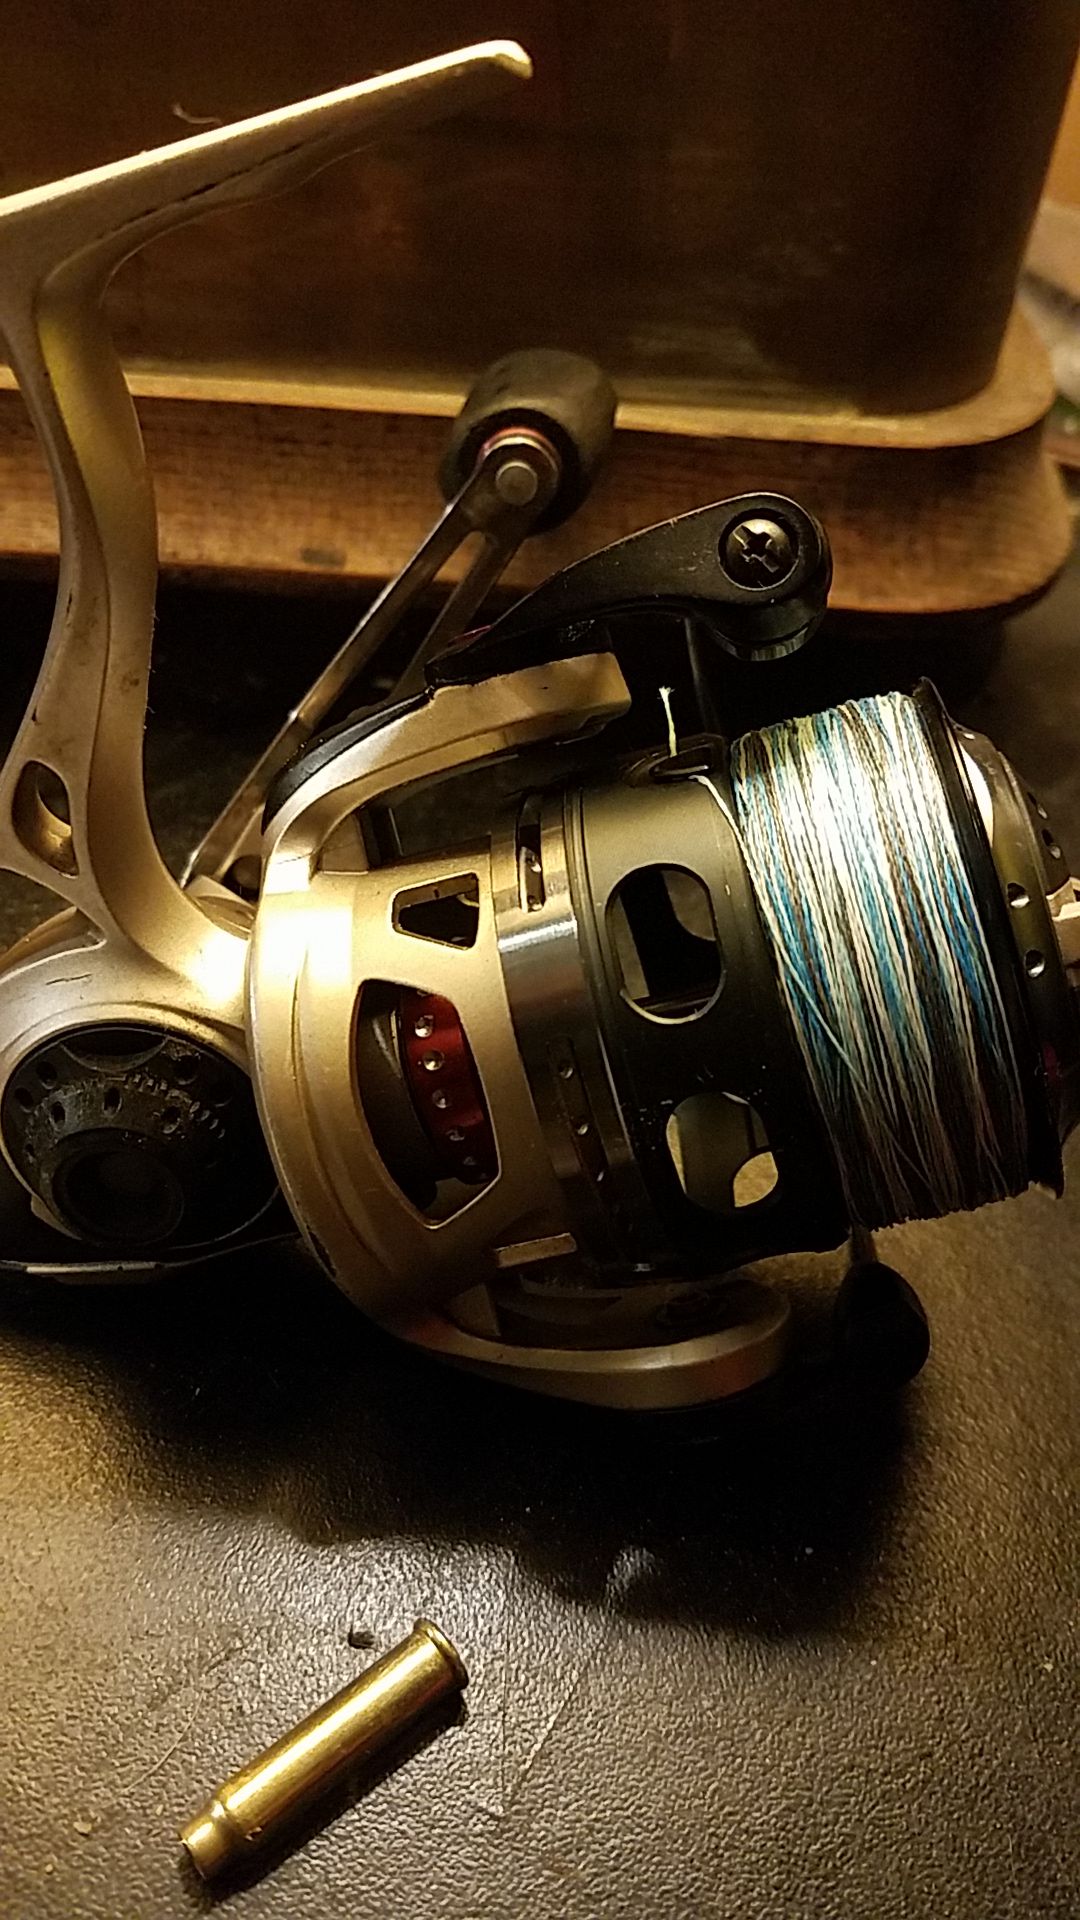 Quantum Exo 30 Pti Spinning Reel for Sale in New Port Richey, FL - OfferUp